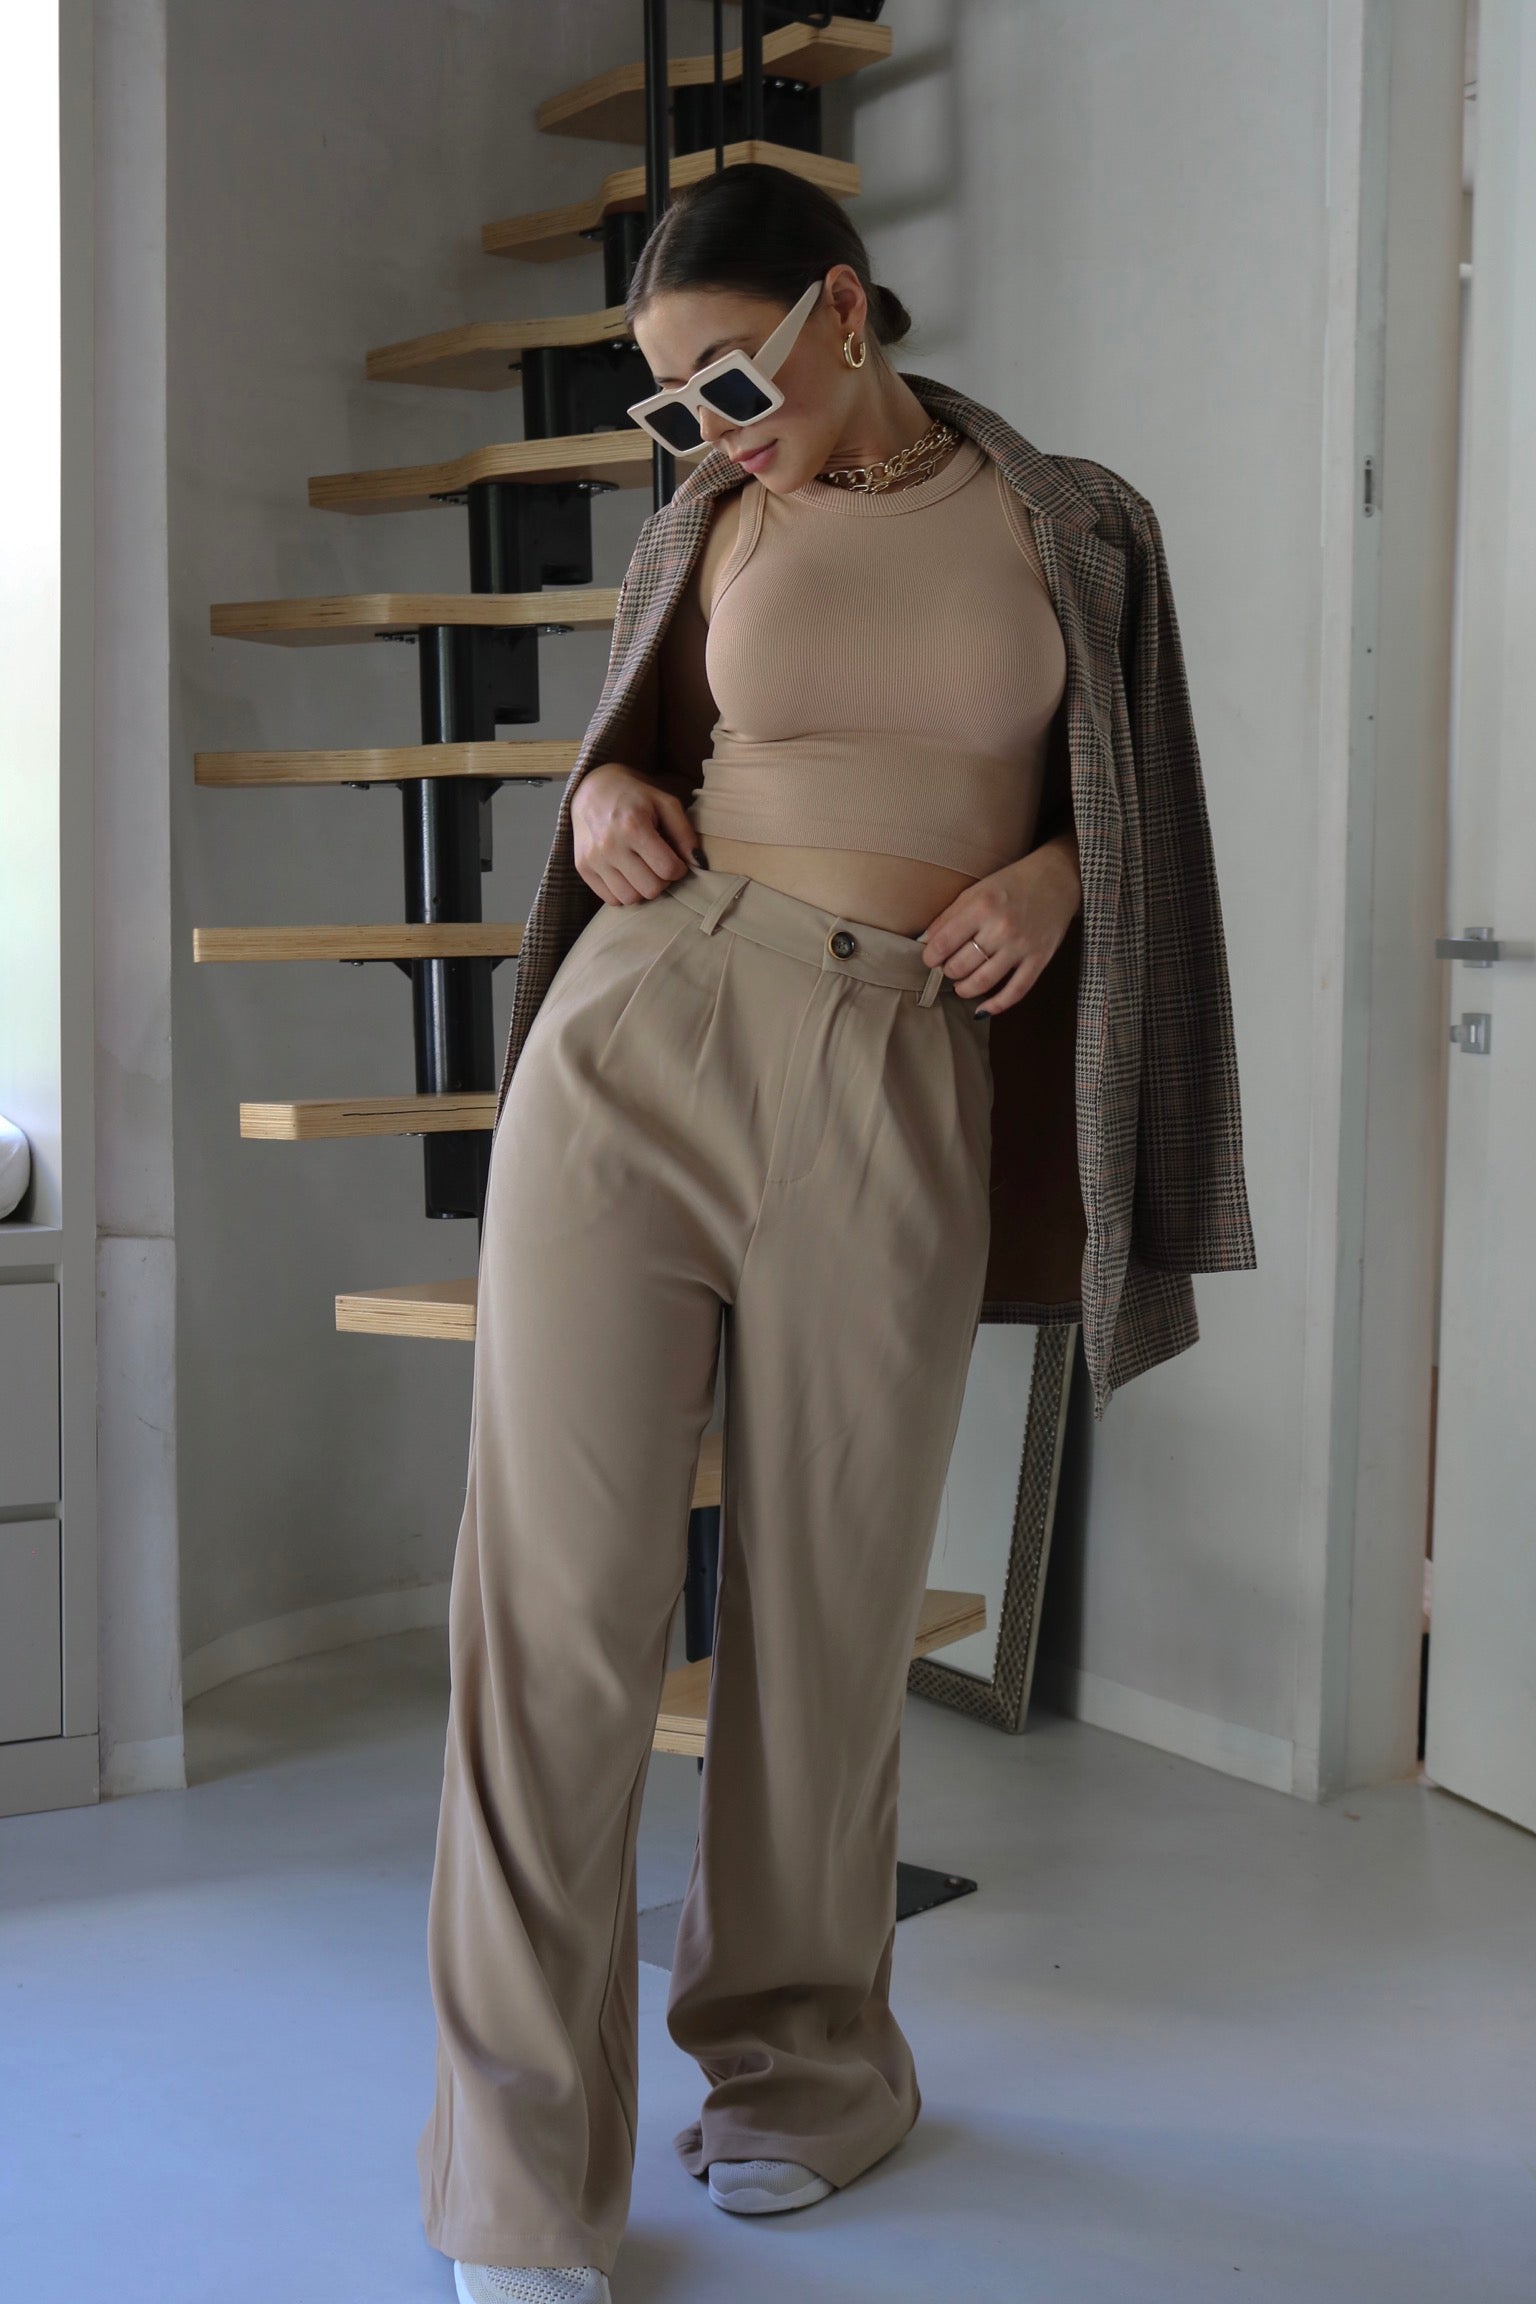 Classic High Waisted Trousers in Taupe. Scarlette The Label, an online fashion boutique for women.